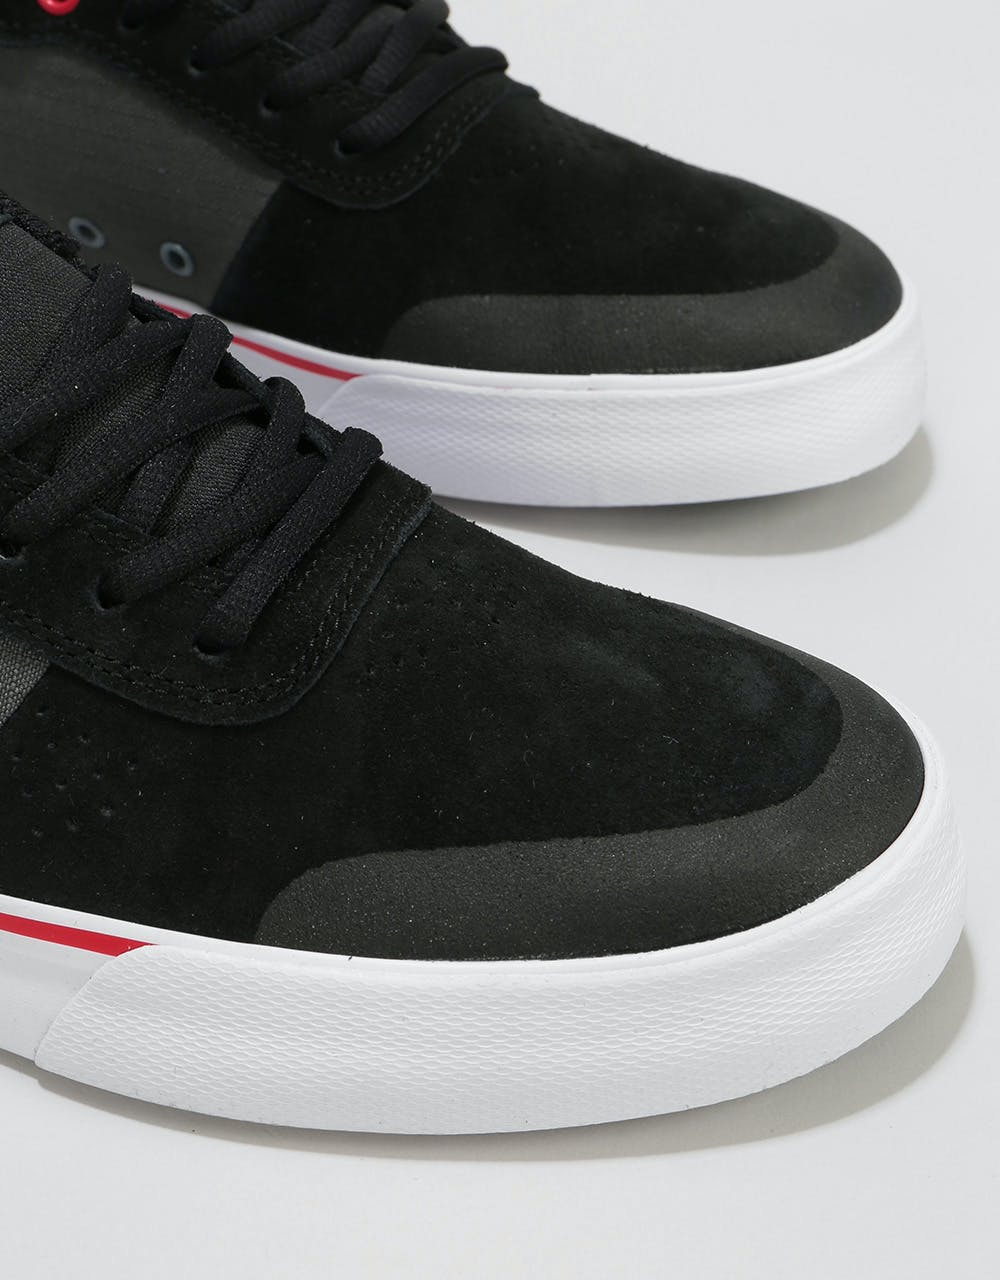 DC Switch Plus S Skate Shoes - Black/Athletic Red/White